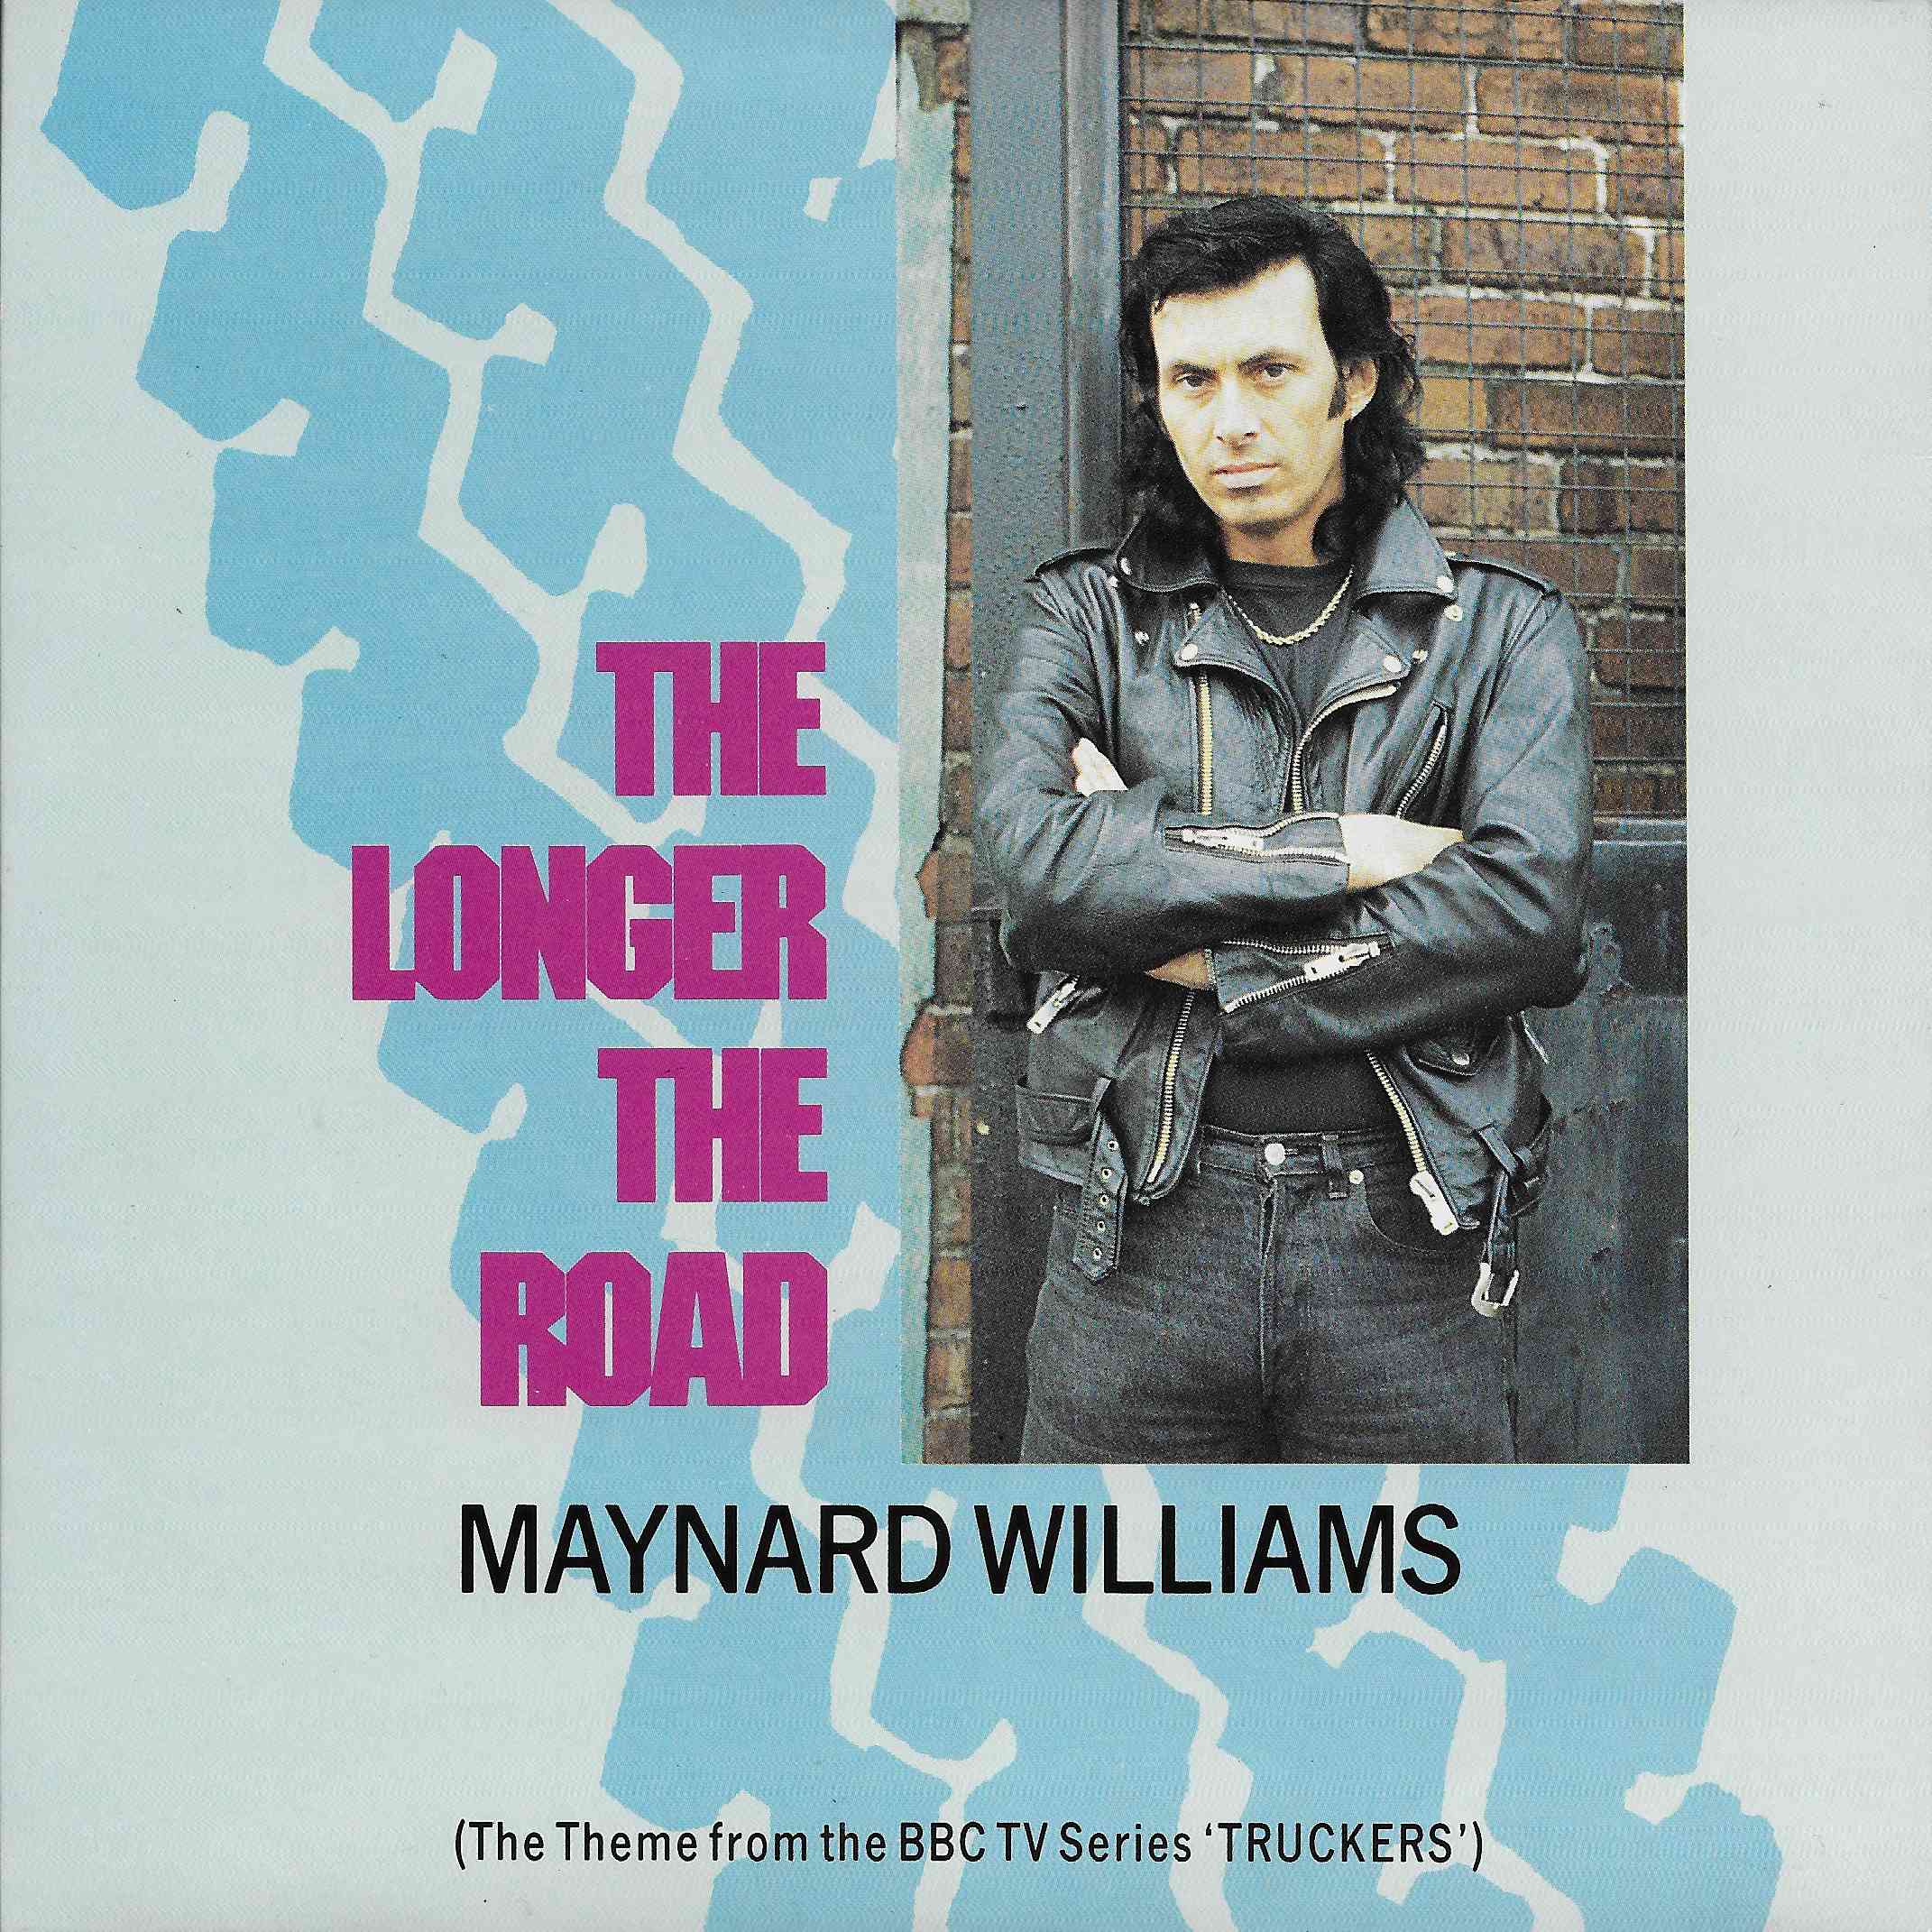 Picture of TEN 195 The longer the road (Theme from Truckers) by artist Maynard Williams from the BBC records and Tapes library